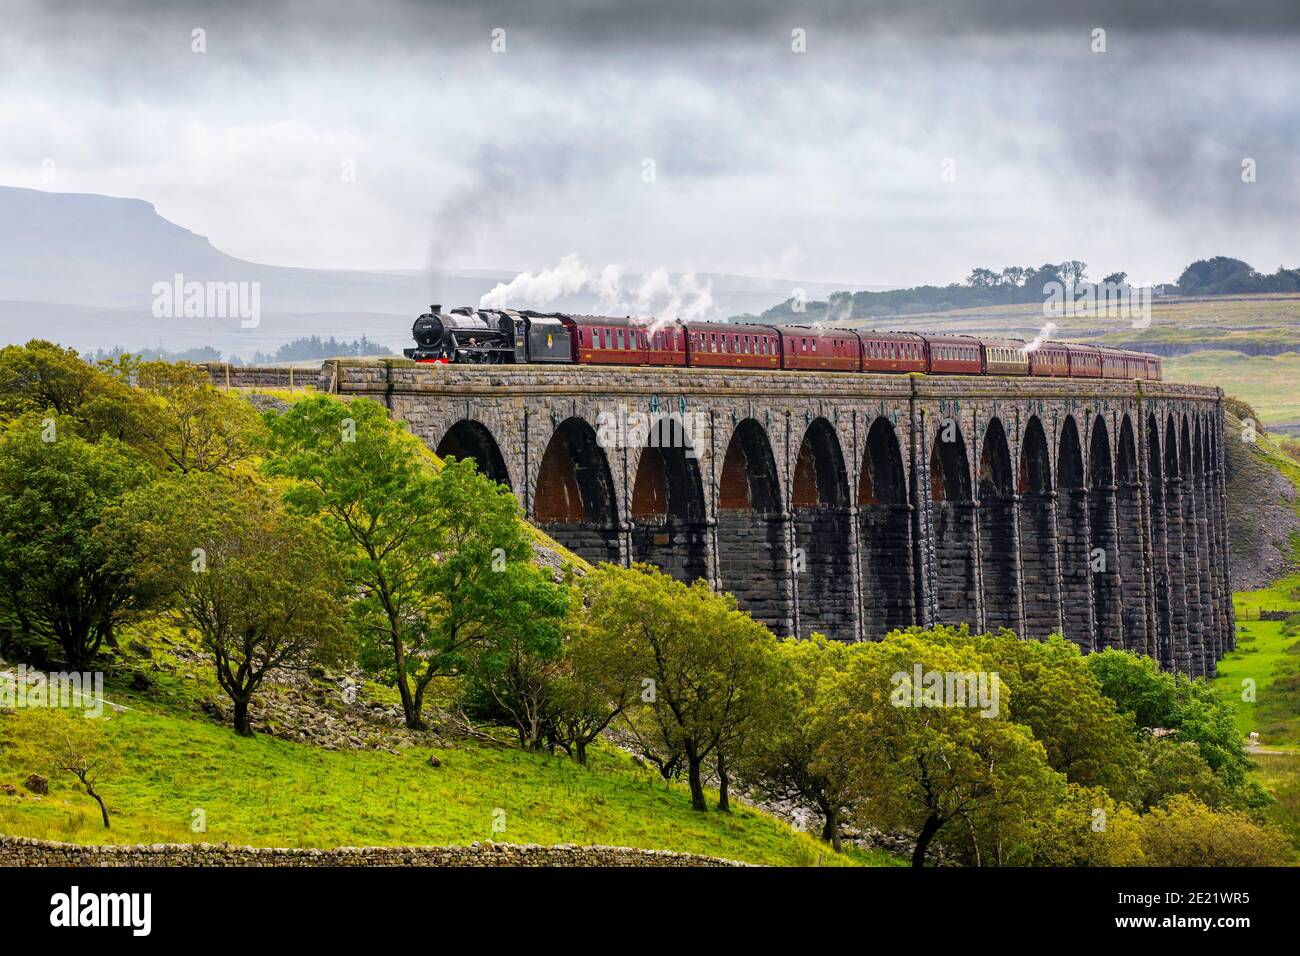 'Fellsman' Steam train crossing the Ribblehead Viaduct on the Settle to Carlise Railway in the Yorkshire dales, UK Stock Photo